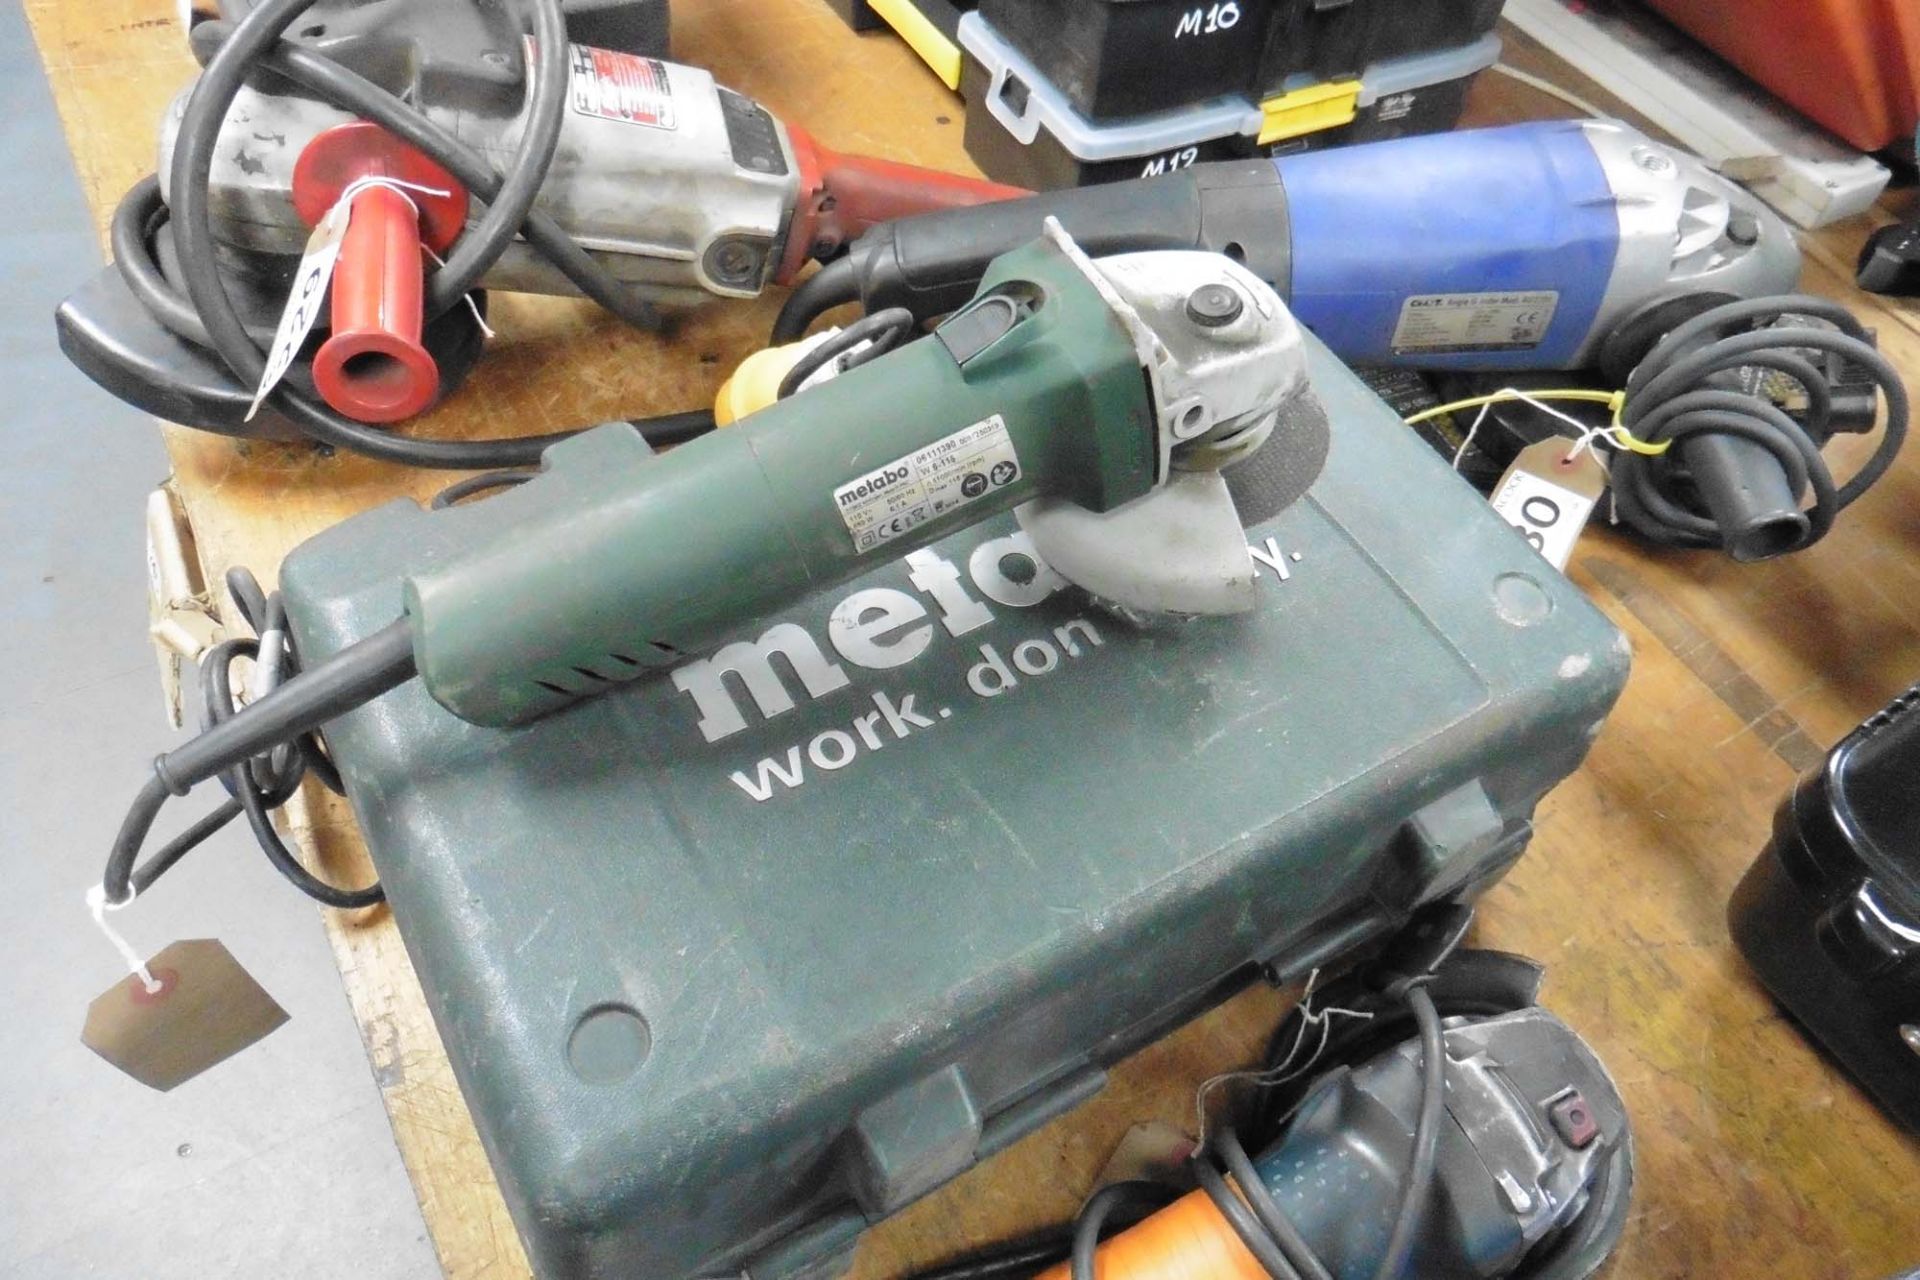 Metabo angle grinder 110v with case and accessories